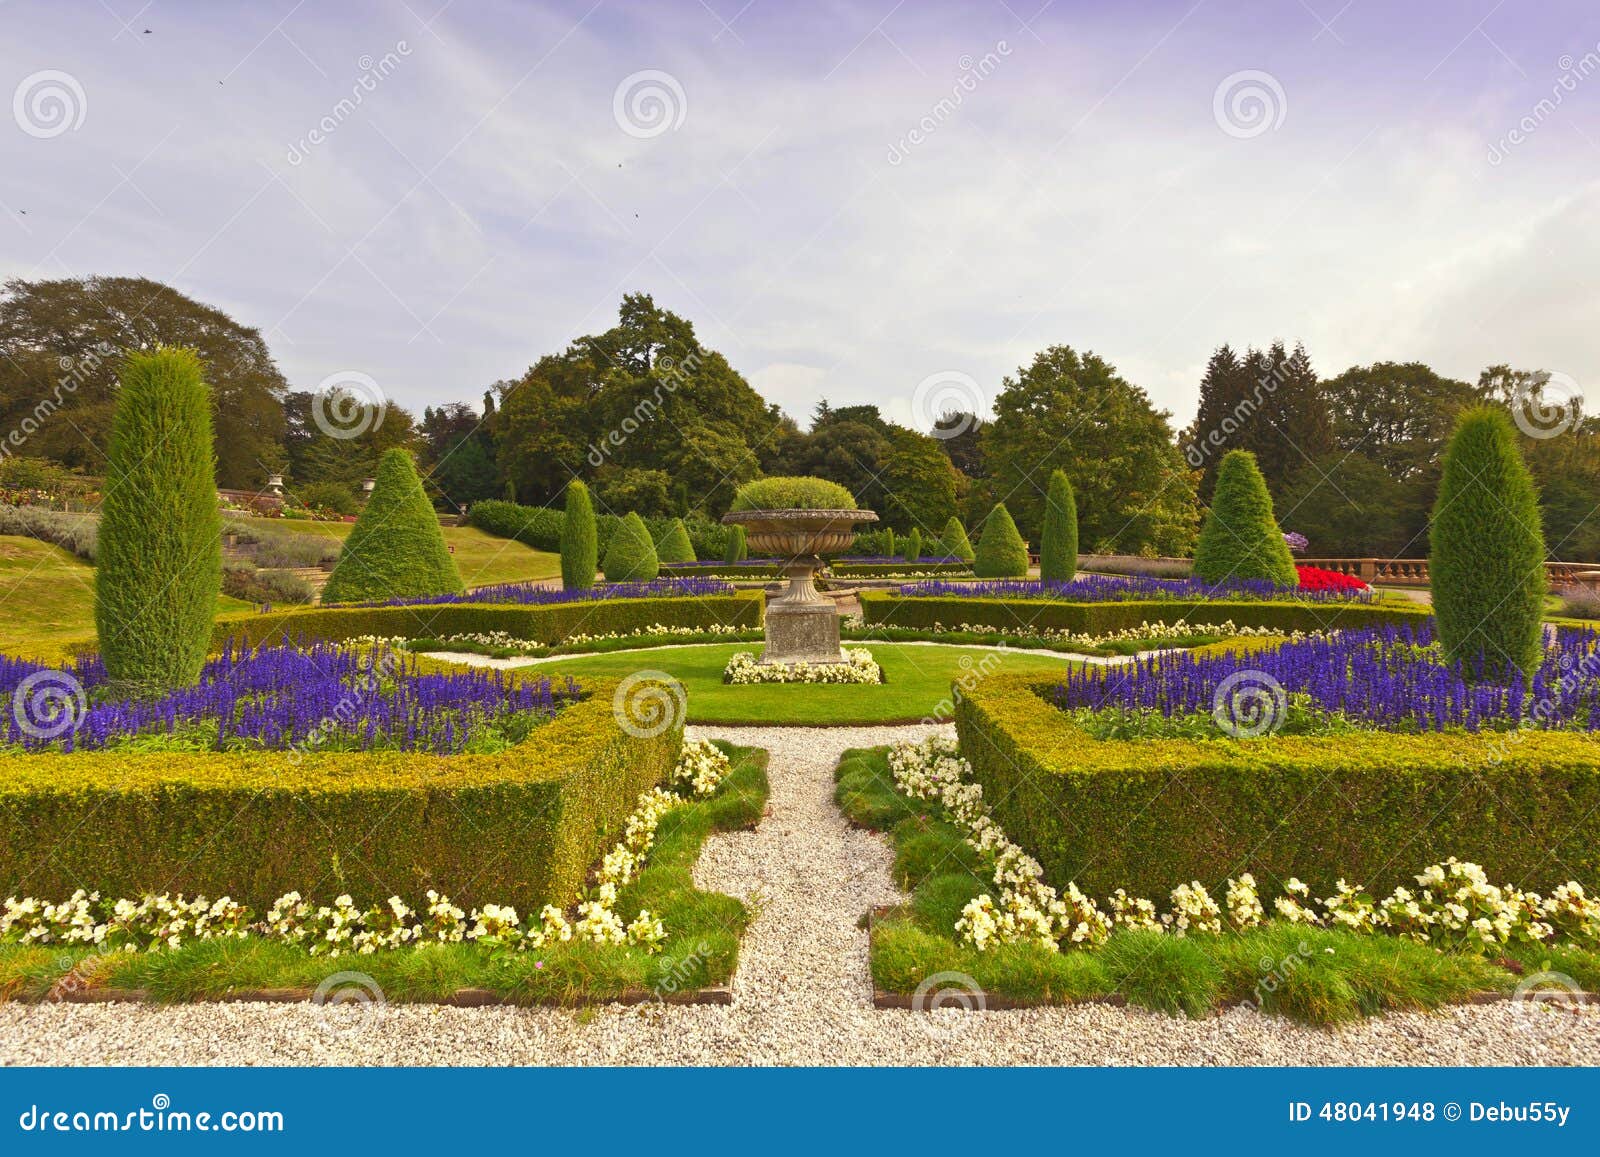 Formal English Garden Stock Photo Image Of Formal Topiary 48041948